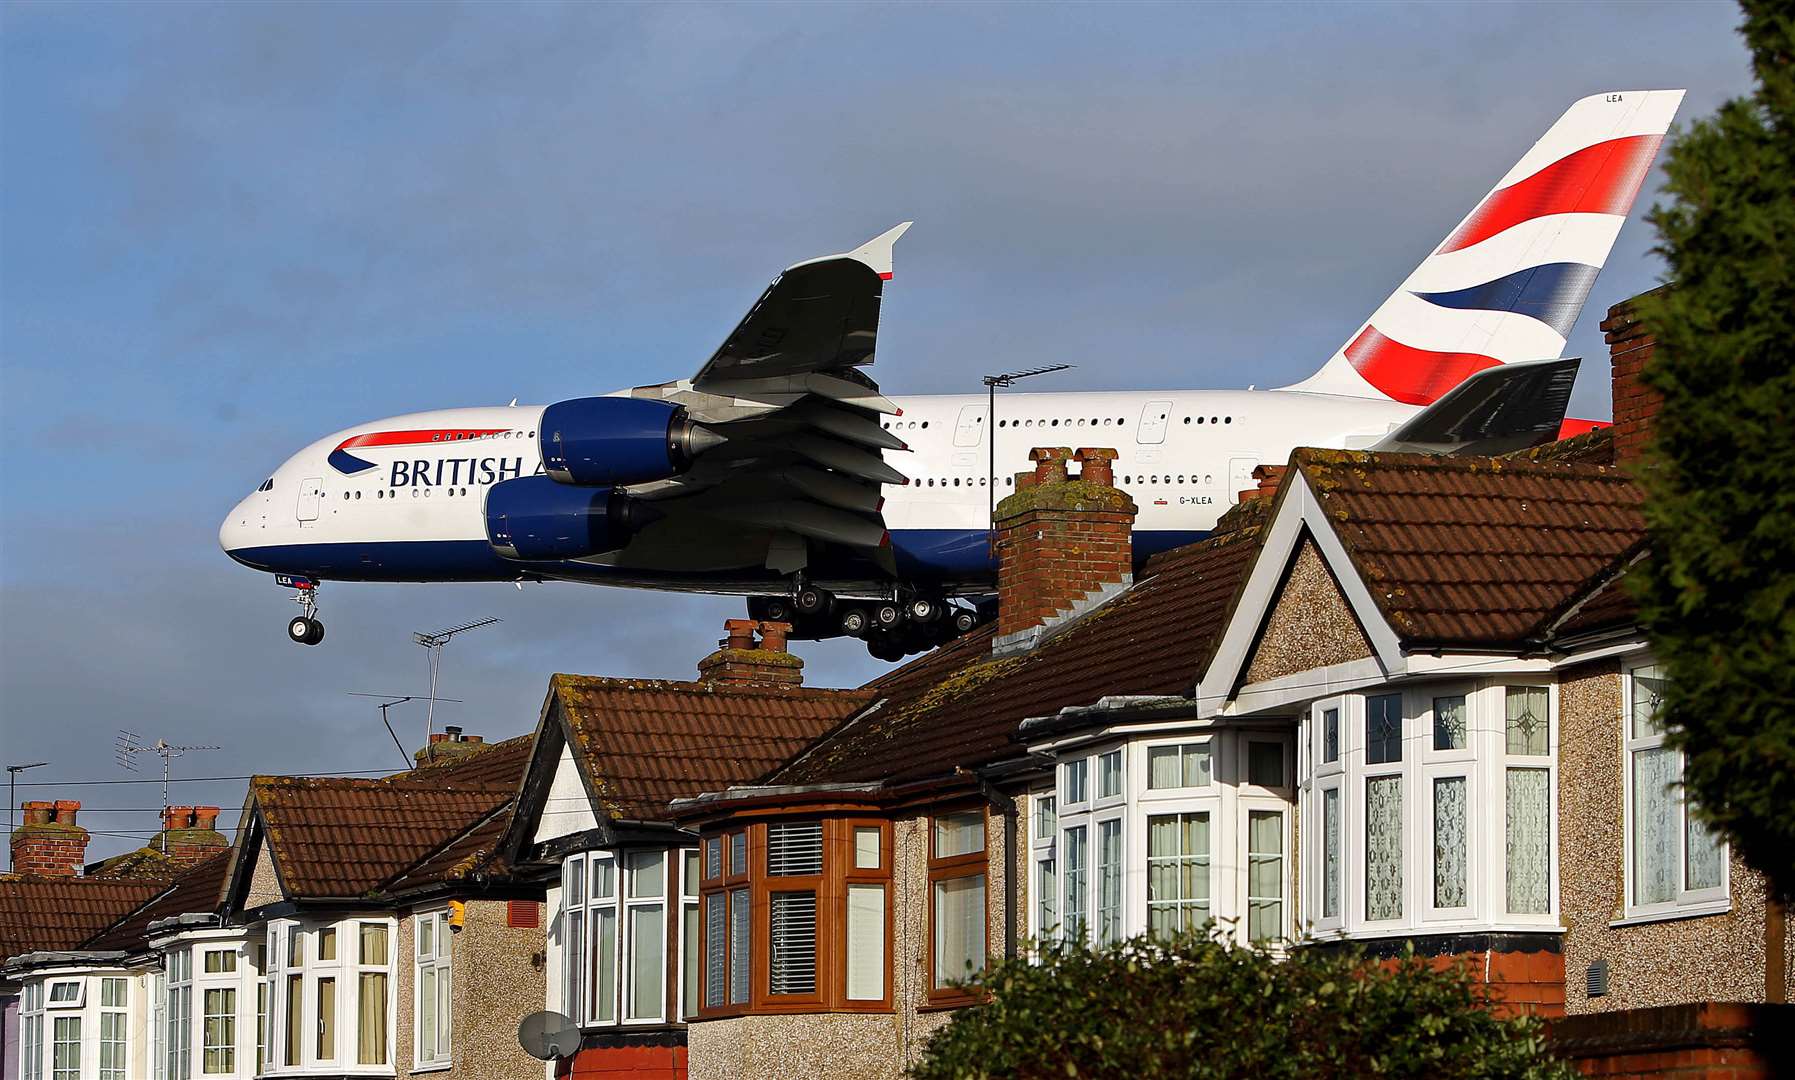 A British Airways Airbus A380 plane lands over houses in Myrtle Avenue during busier times (Steve Parsons/PA)